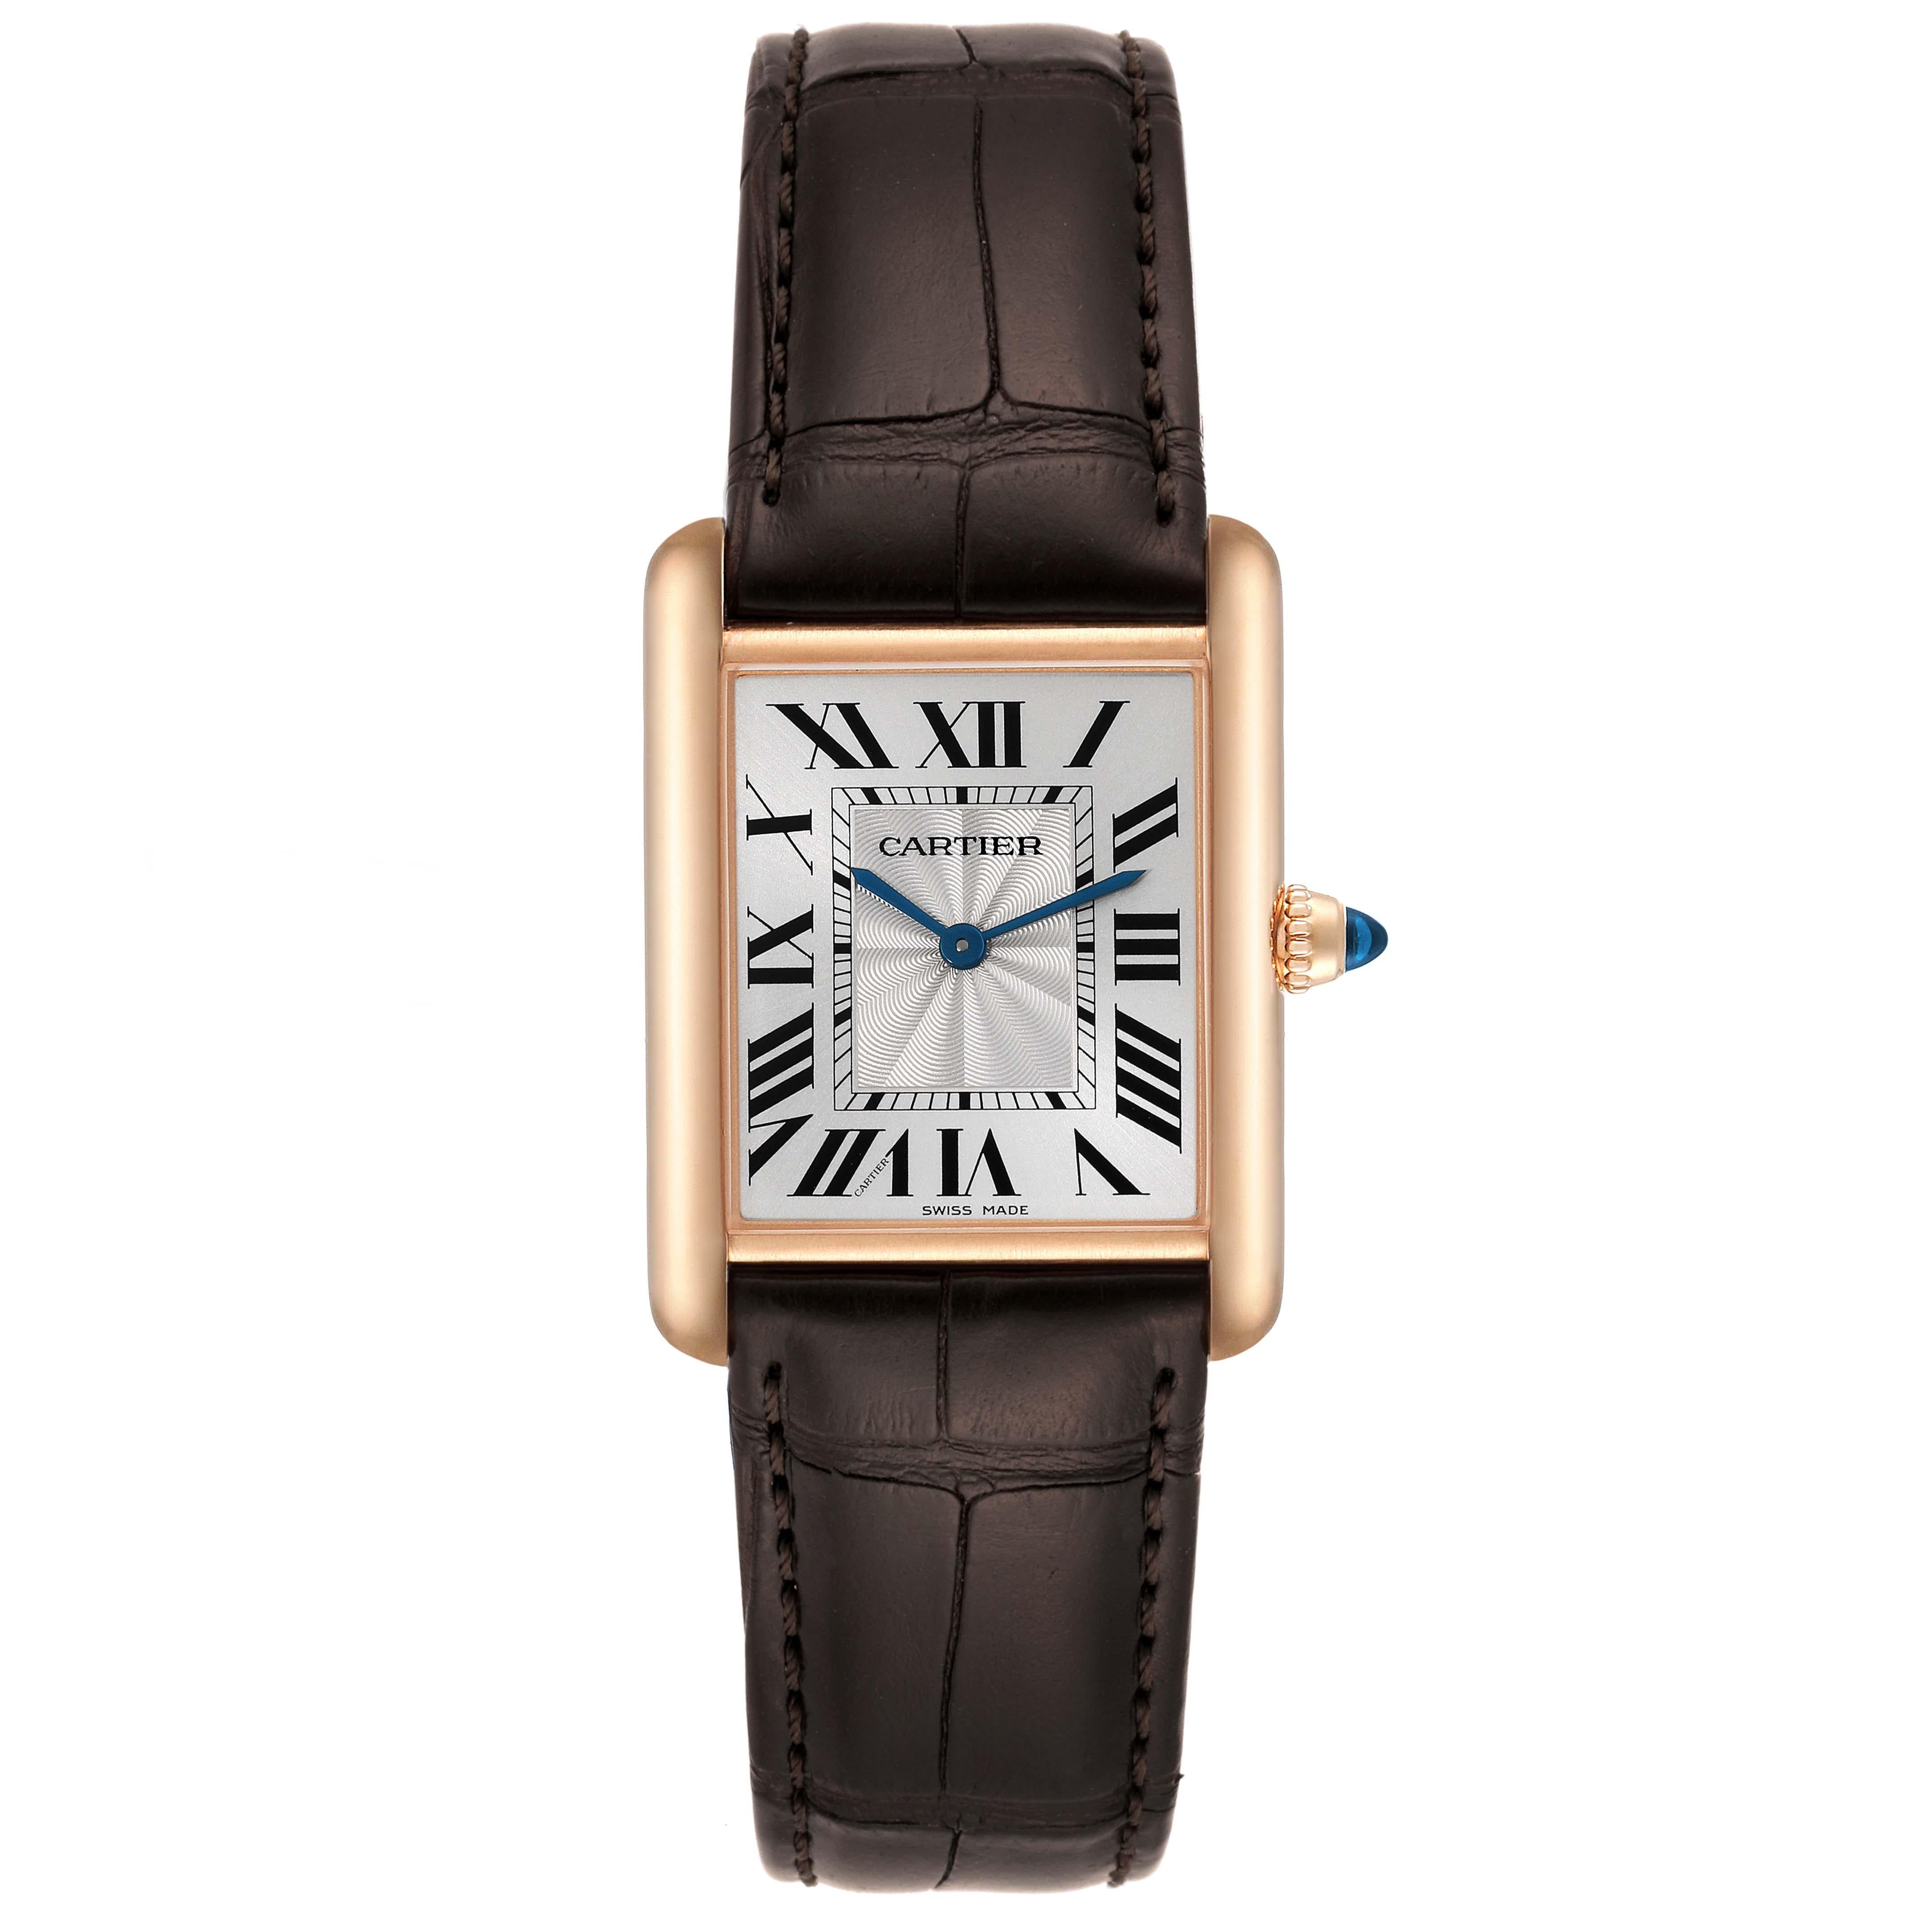 Cartier Tank Louis Rose Gold Mechanical Mens Watch WGTA0011 Card. Manual winding movement. 18k rose gold case 25 mm x 33 mm. Circular grained crown set with a blue sapphire cabochon. . Scratch resistant sapphire crystal. Silvered guilloche dial with